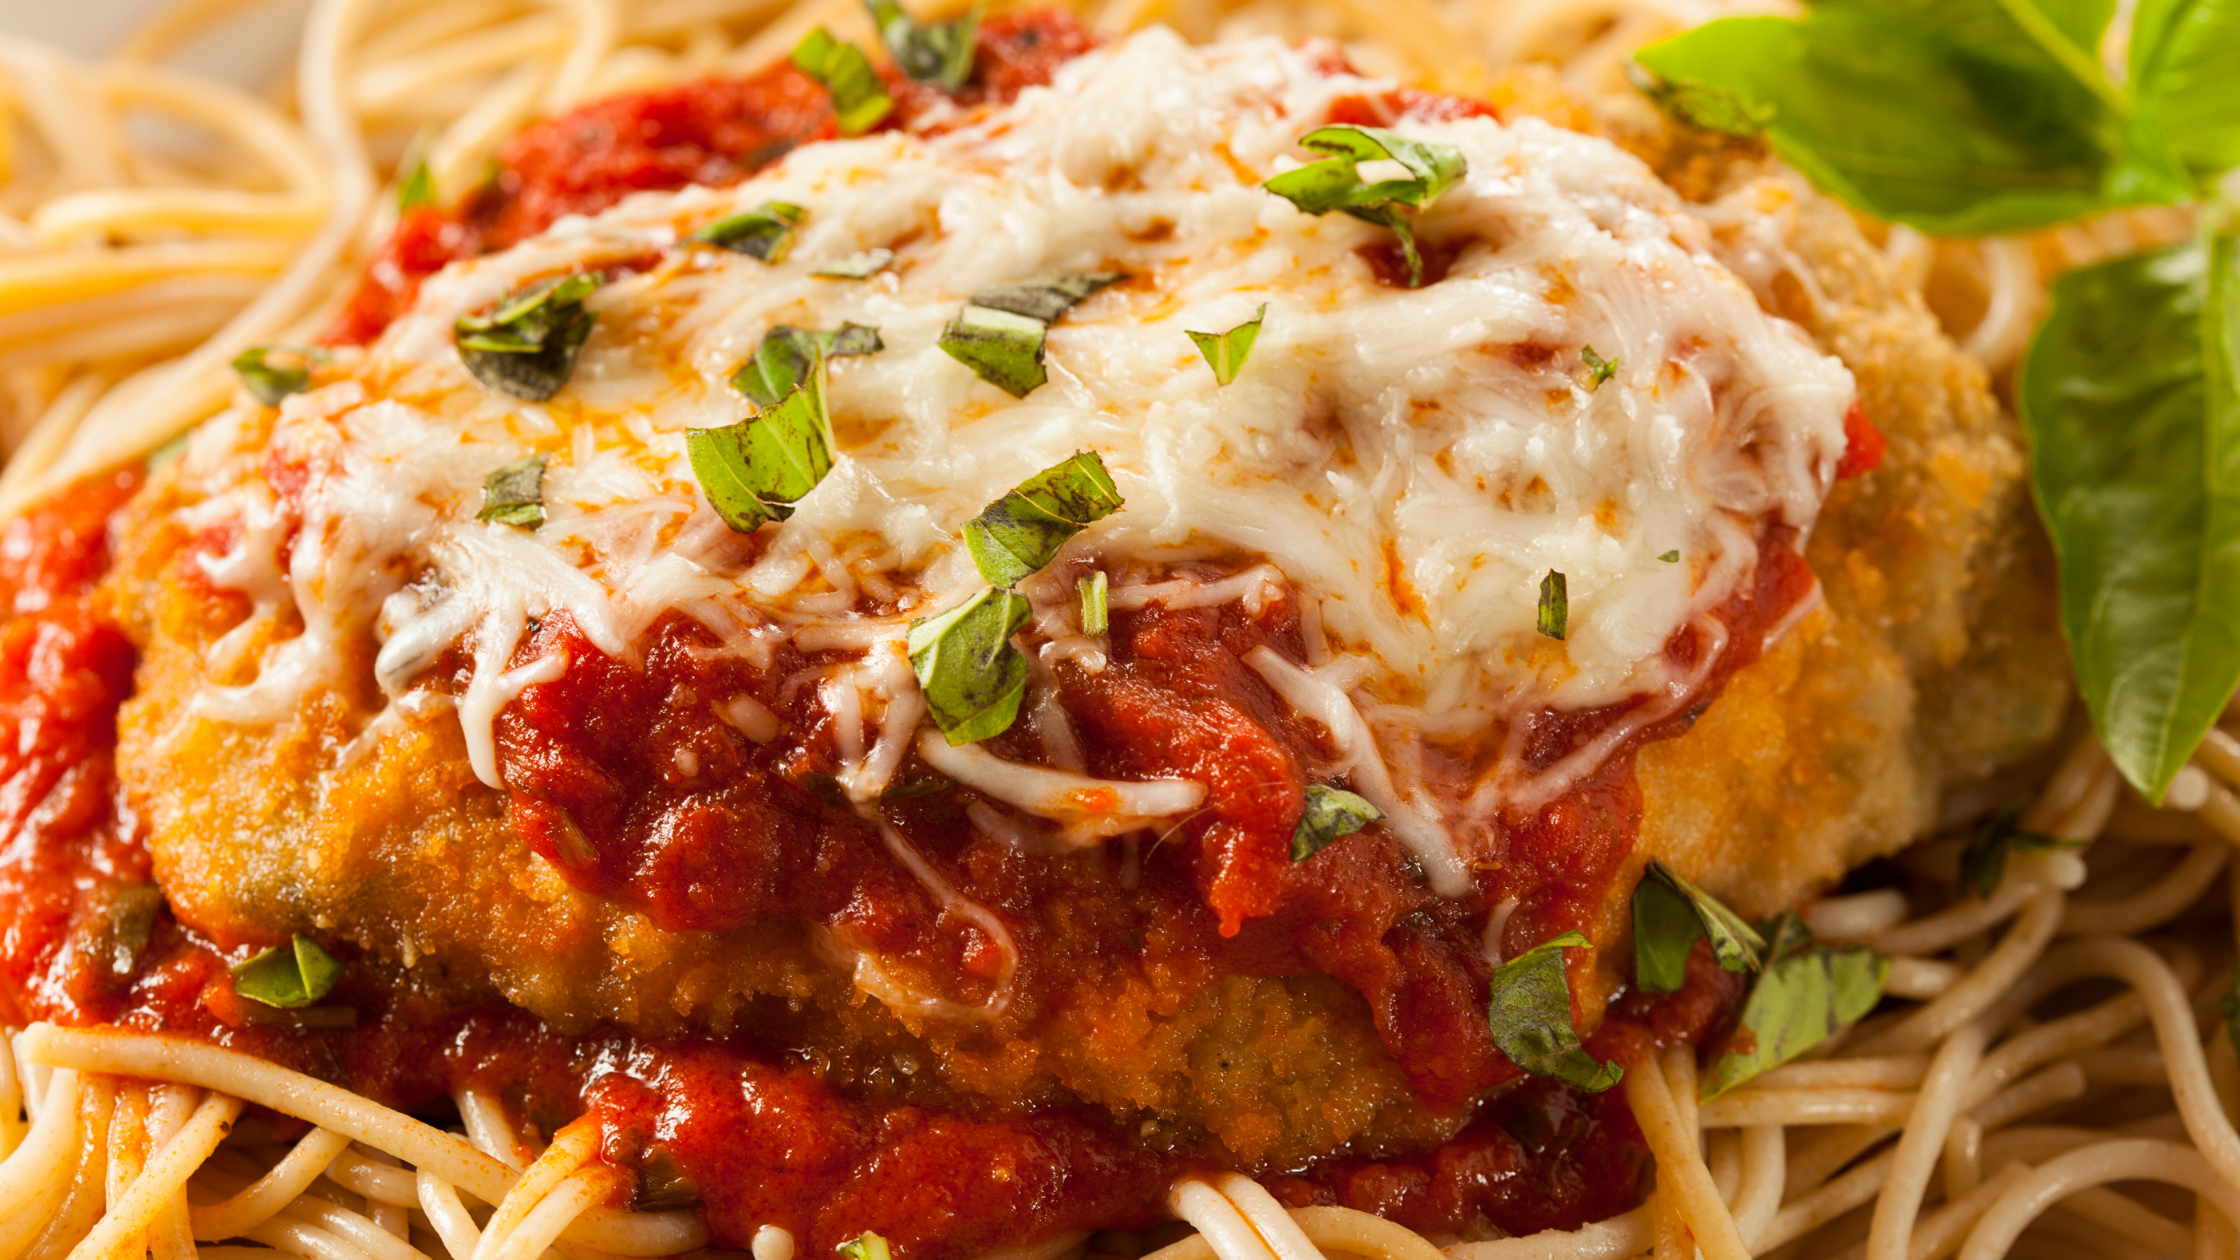 Low Calorie Chicken Parmesan with Whole Grain Spaghetti: A Healthy Recipe for Delicious Italian Food 31